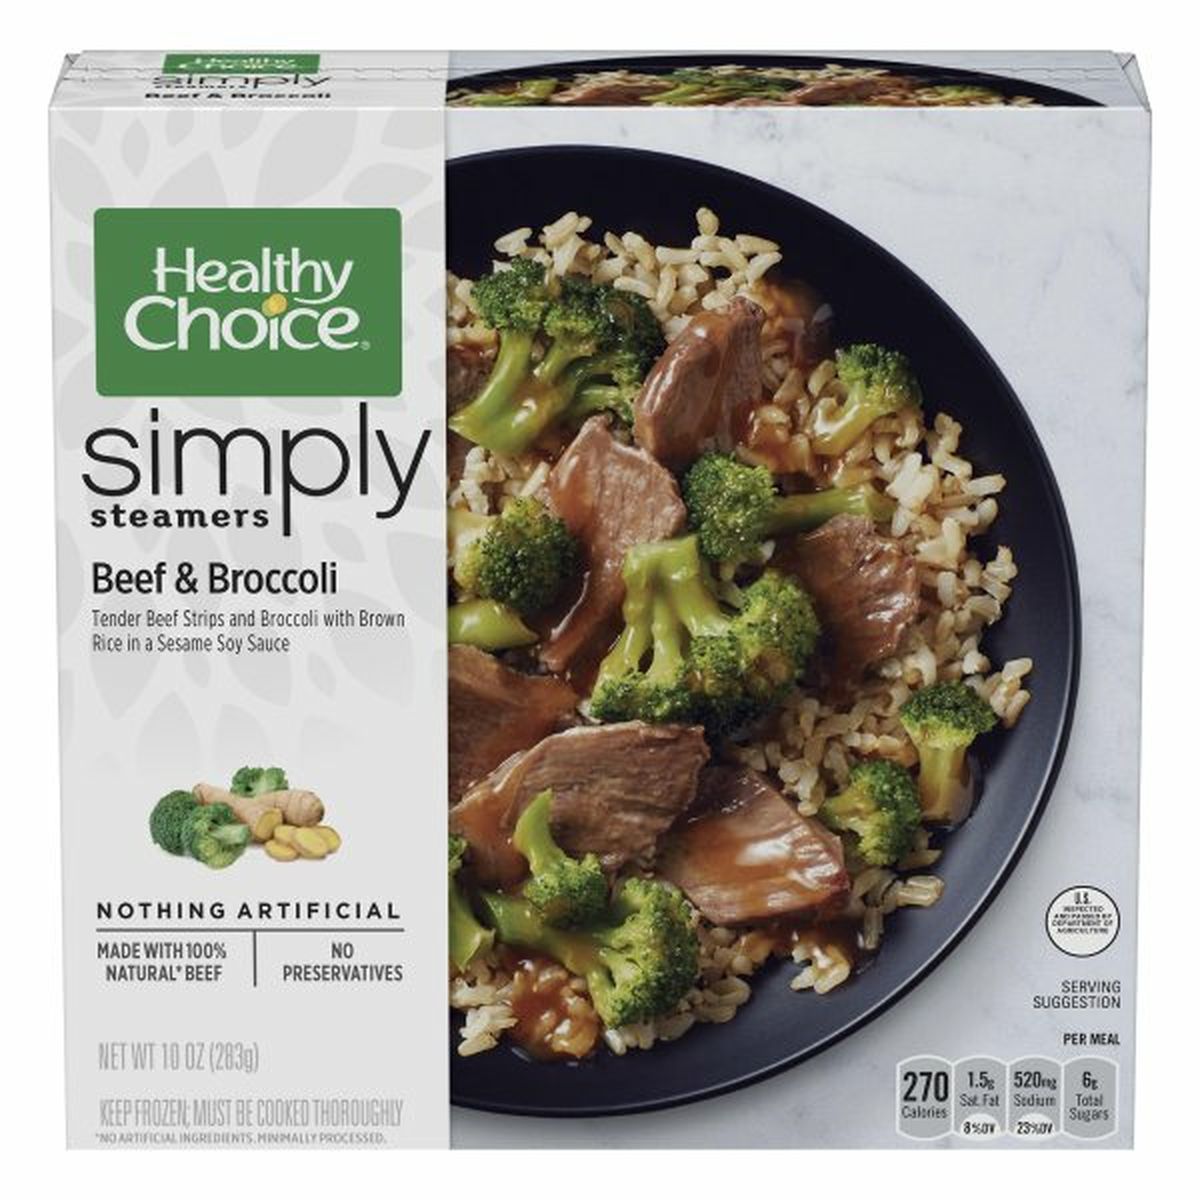 Calories in Healthy Choice Simply Steamers Beef & Broccoli